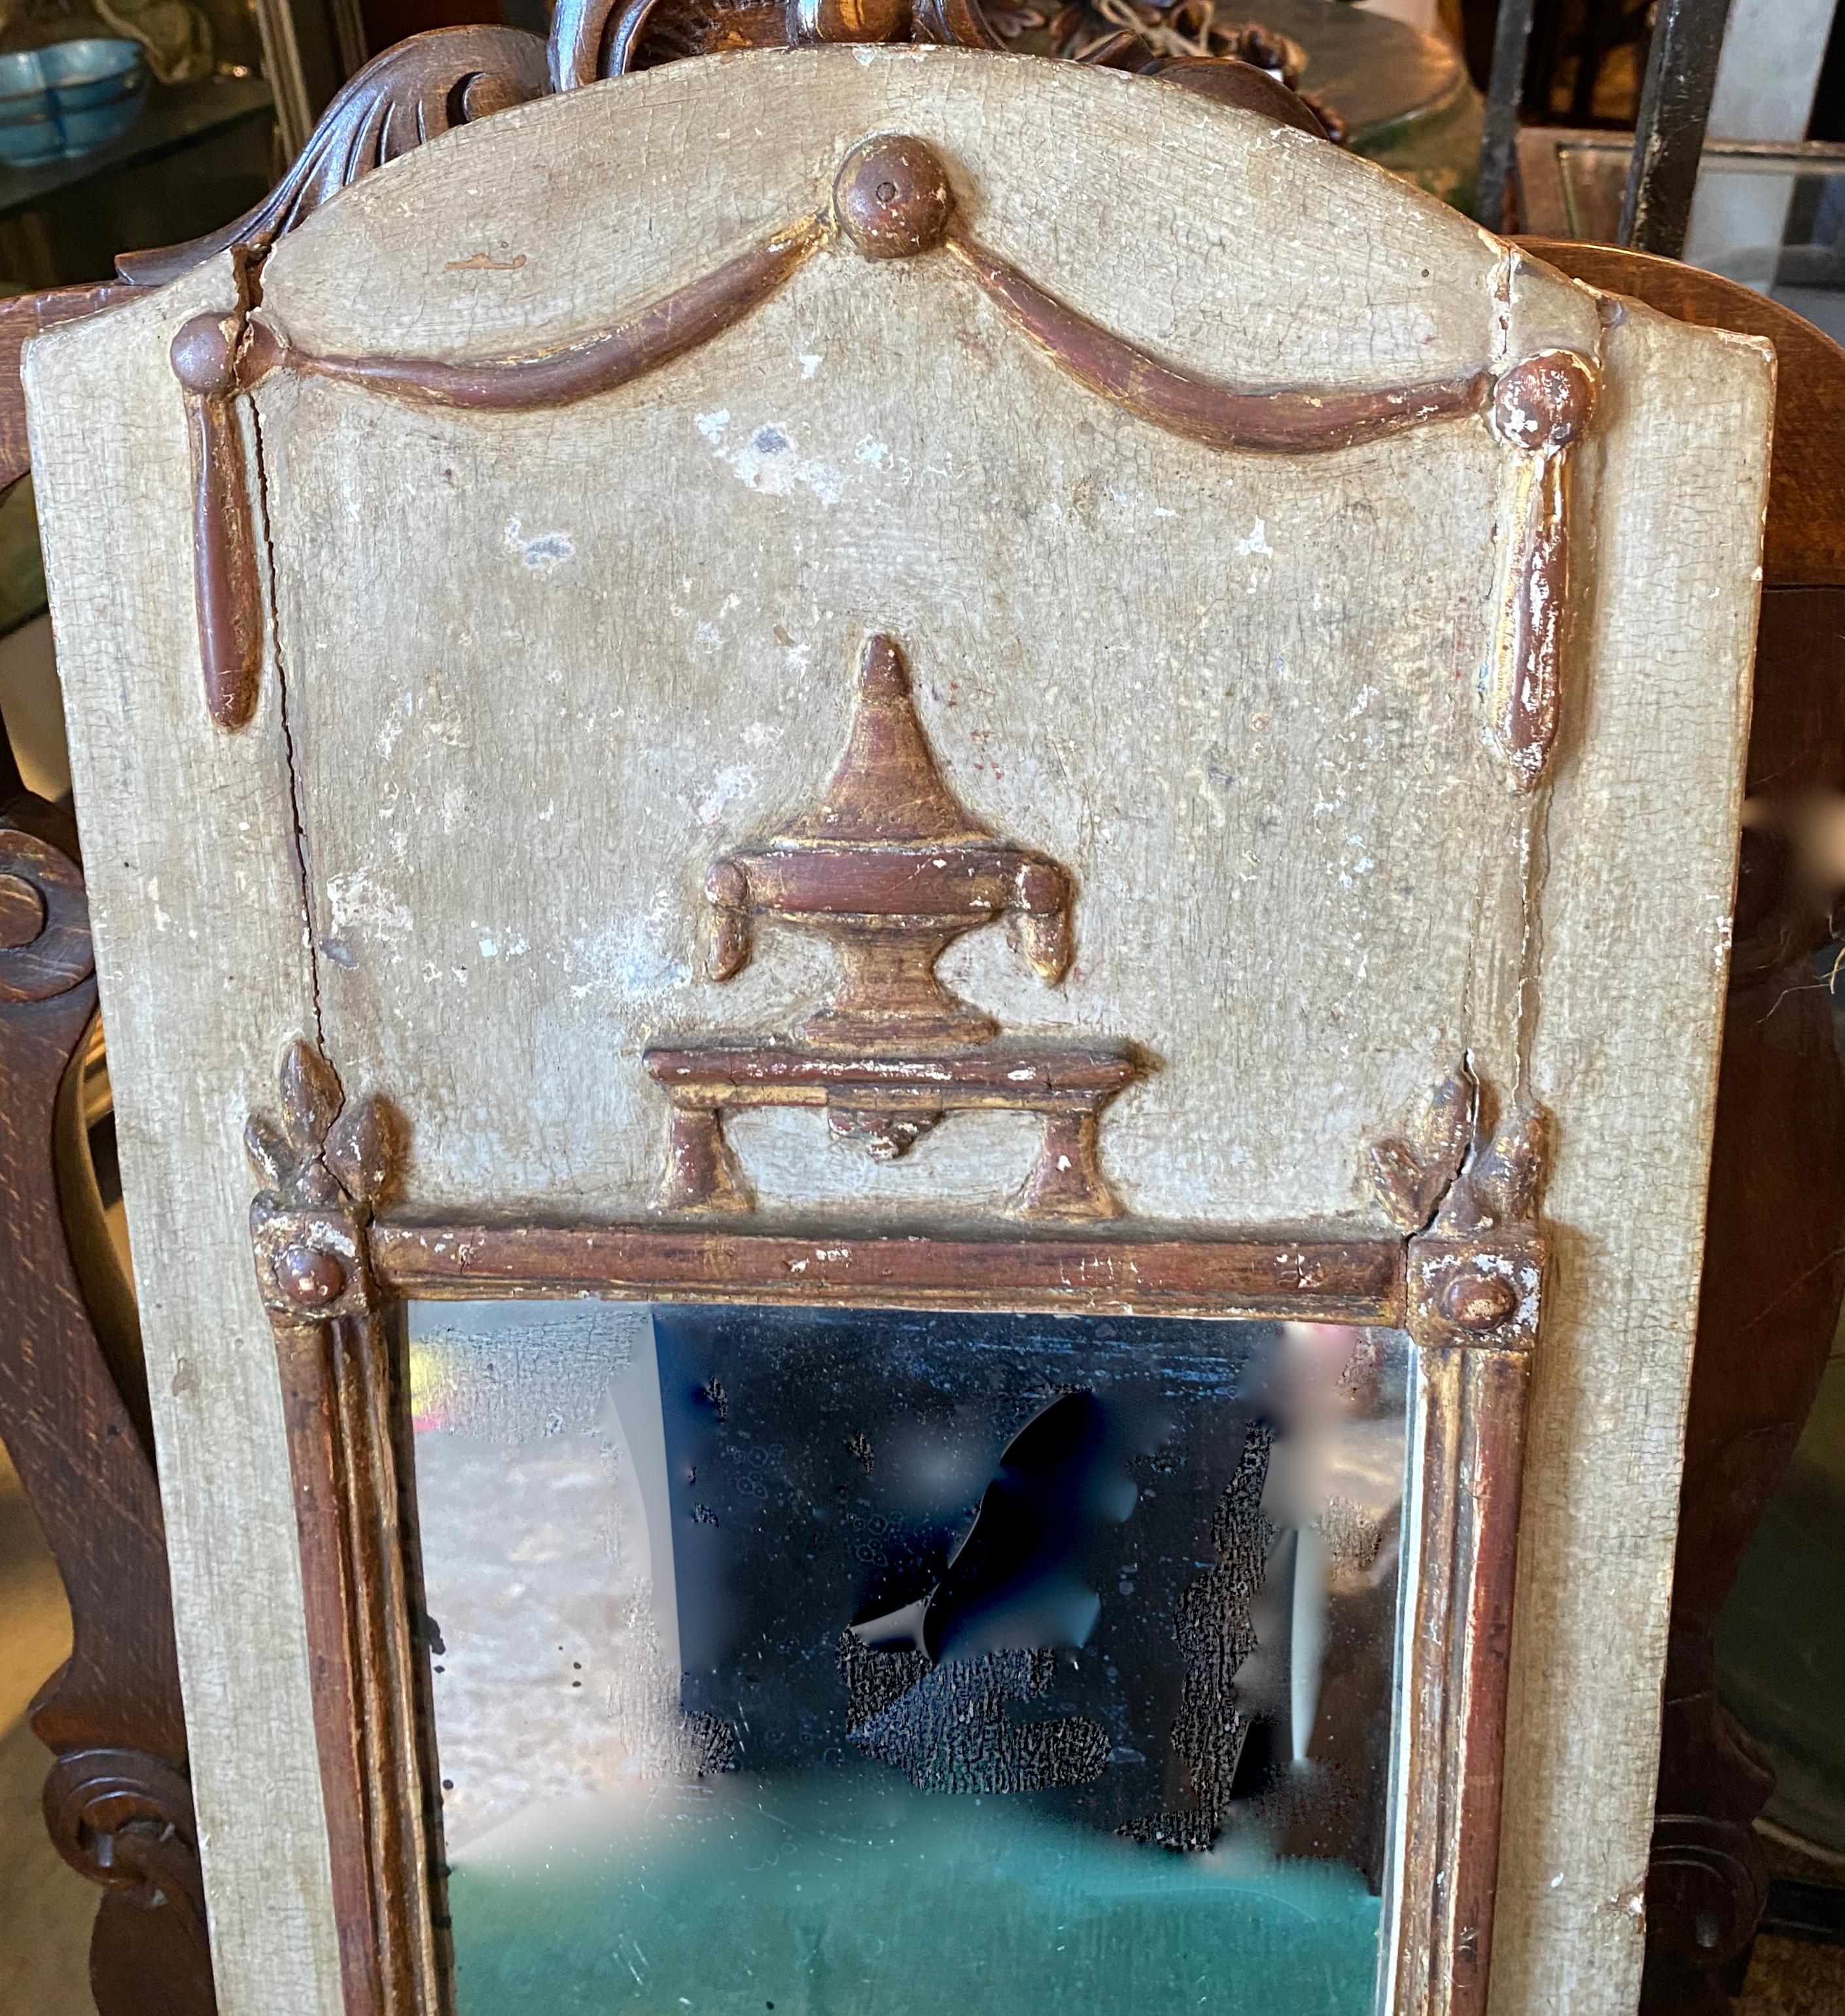 This is a charming late 18th century neoclassical marriage mirror. This petit trumeau retains its original painted, gilt surface and mirror and has acquired a wonderful deep natural patina.
Marriage mirrors were given as wedding presents to brides